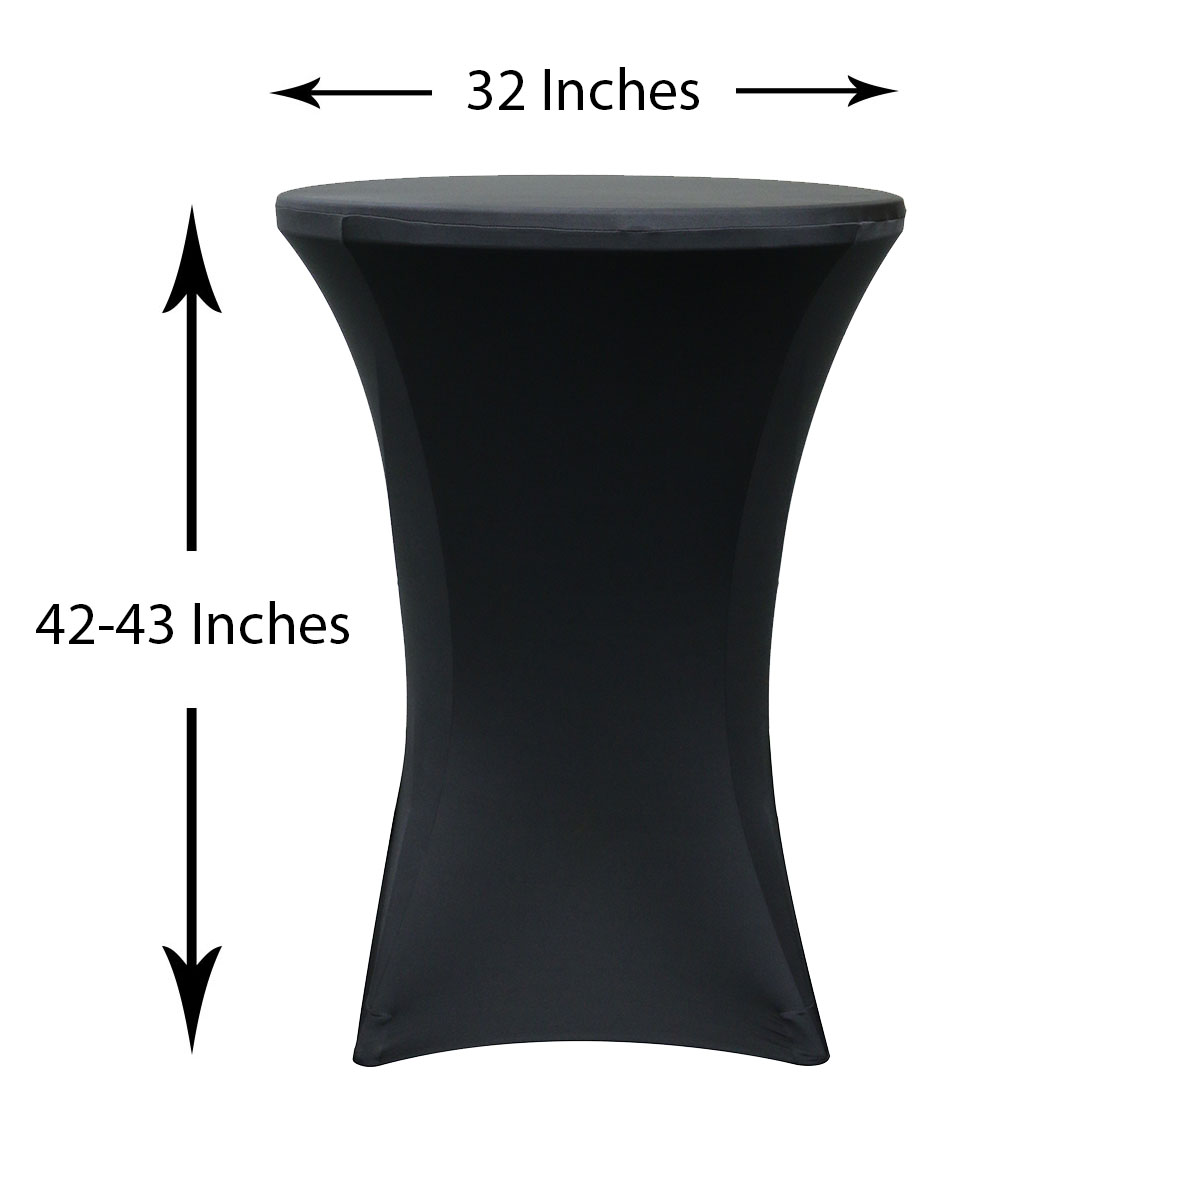 32-inch-highboy-cocktail-spandex-table-covers-black-dimensions.jpg